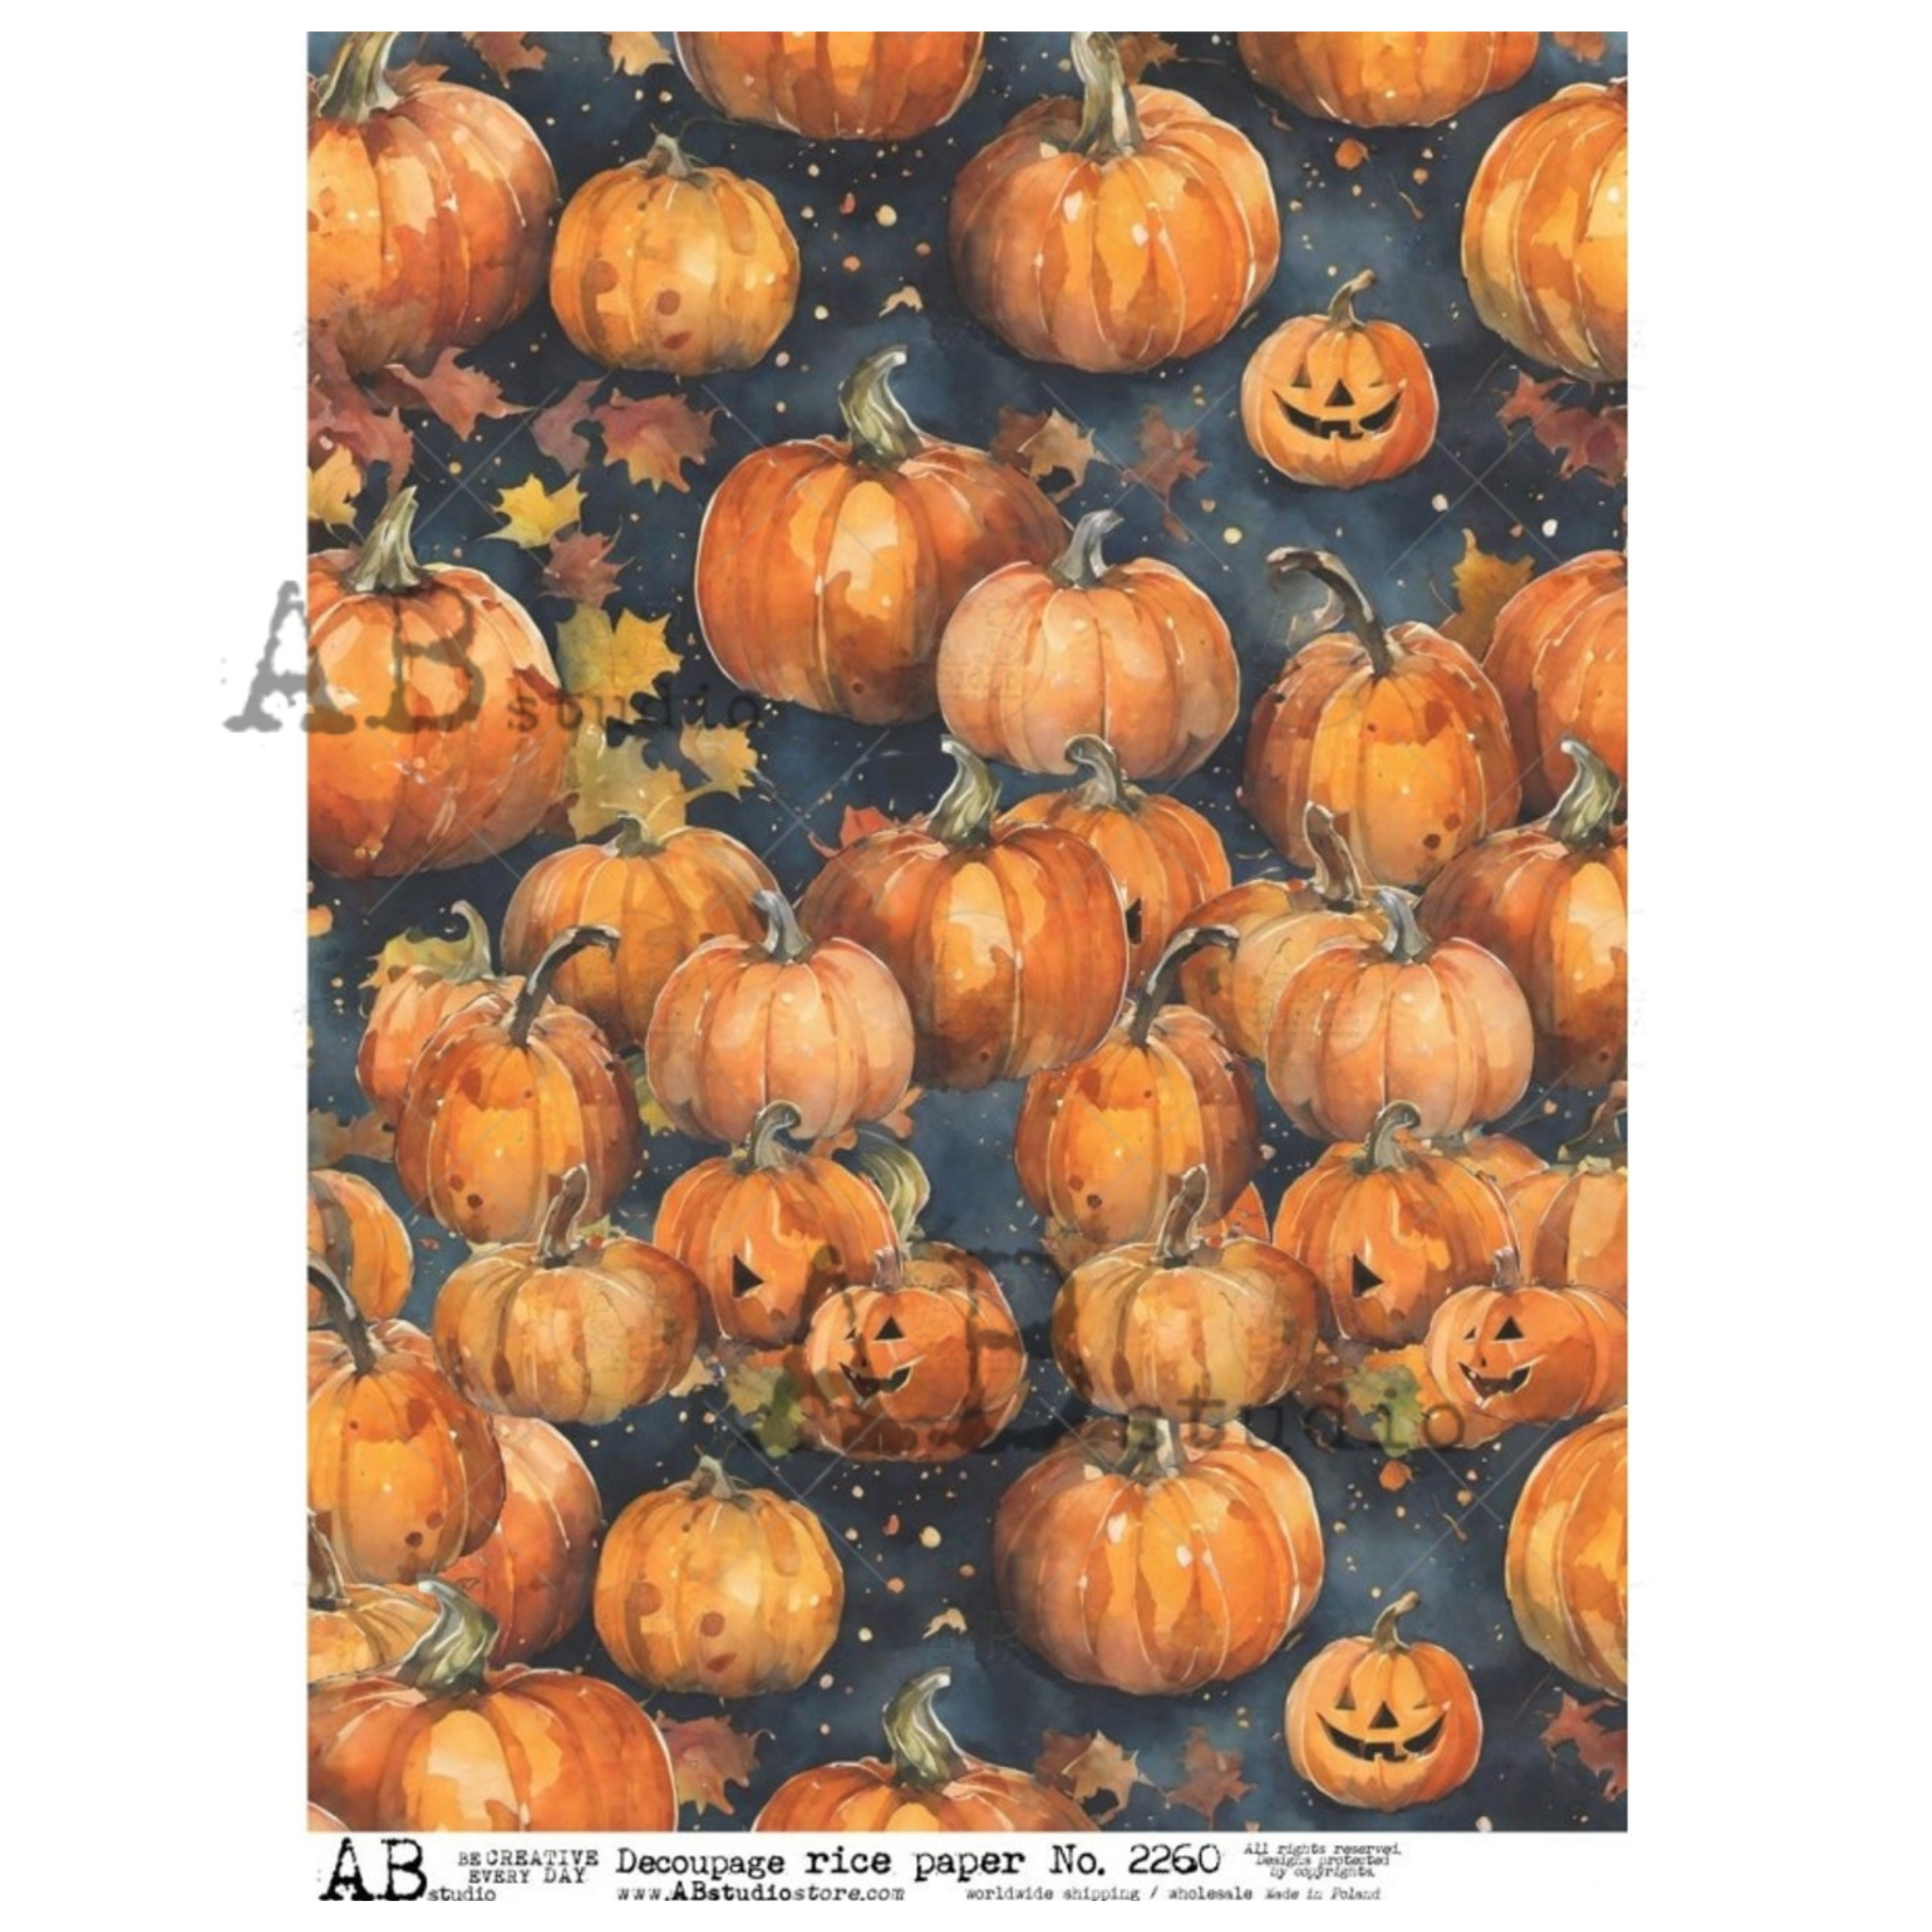 A4 rice paper that features a smoky background, complete with fall leaves, pumpkins, and jack-o-lanterns. White borders are on the sides.